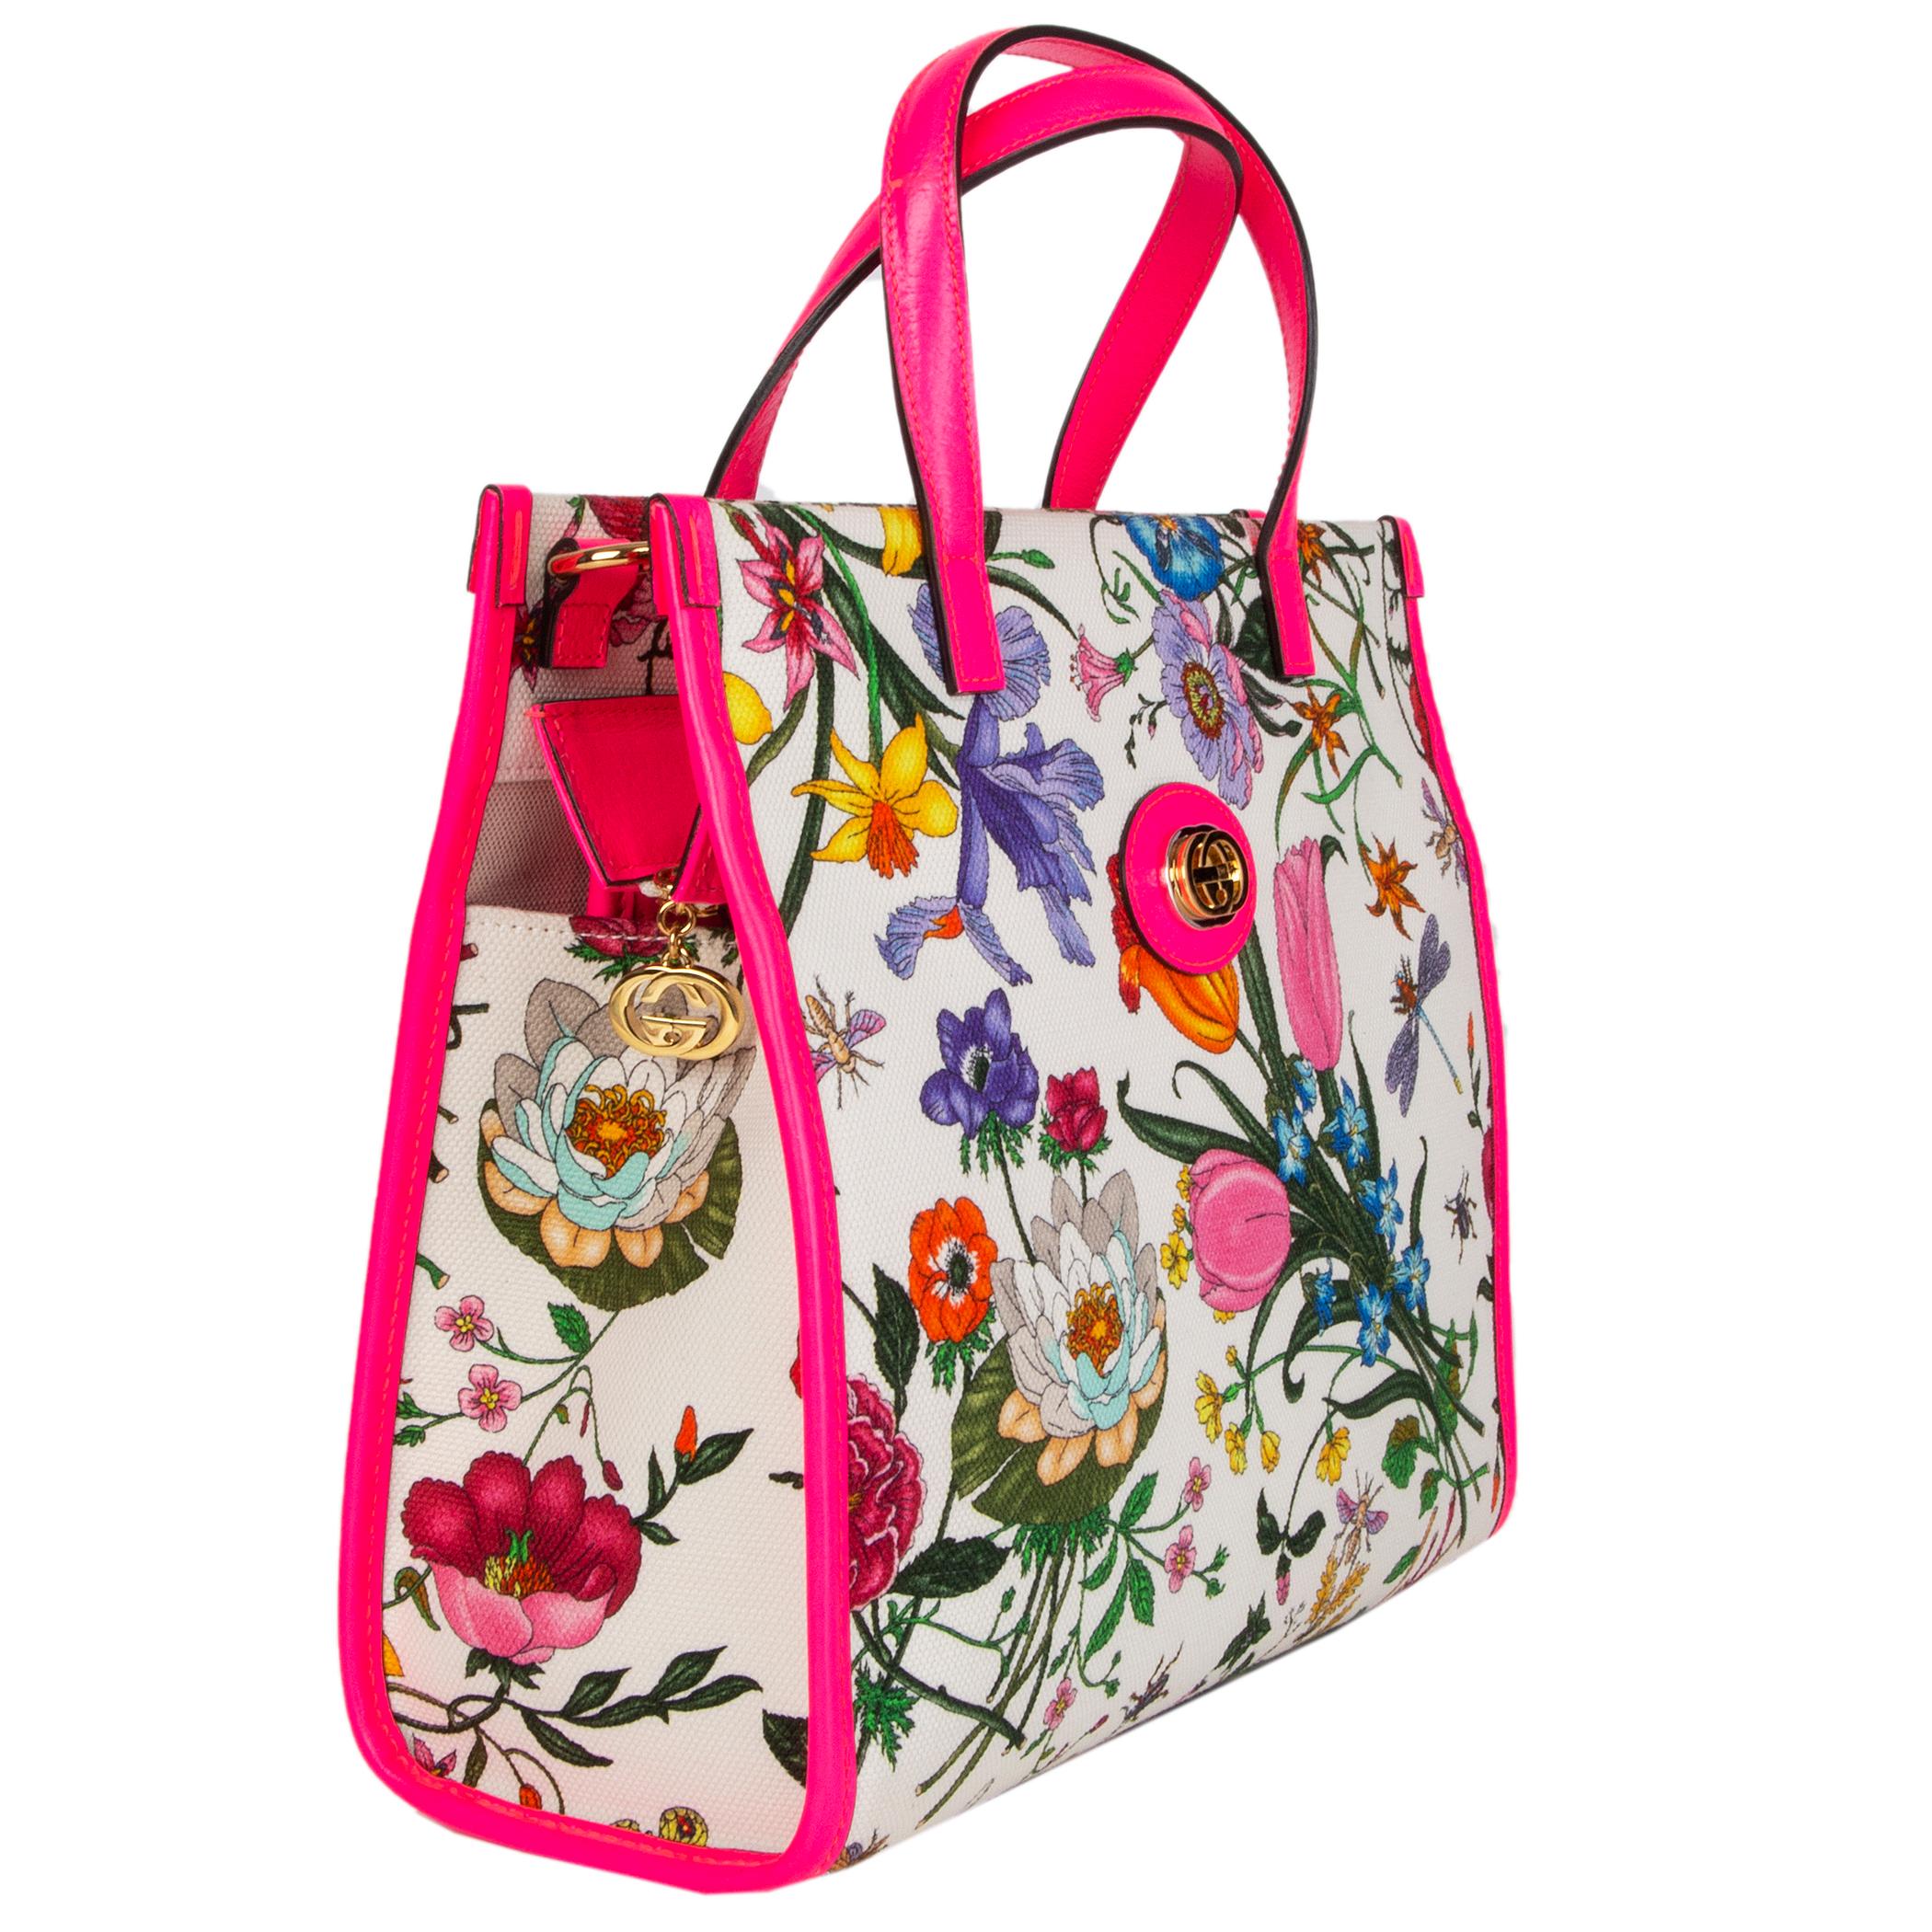 Gucci Neon Flora Medium Tote in multicolor flora canvas with neon pink leather details. Detachable and adjustable shoulder strap. Closes with a zipper on top. Unlined with an open pocket against the back. Brand new. Comes with dust bag.

Height 25cm